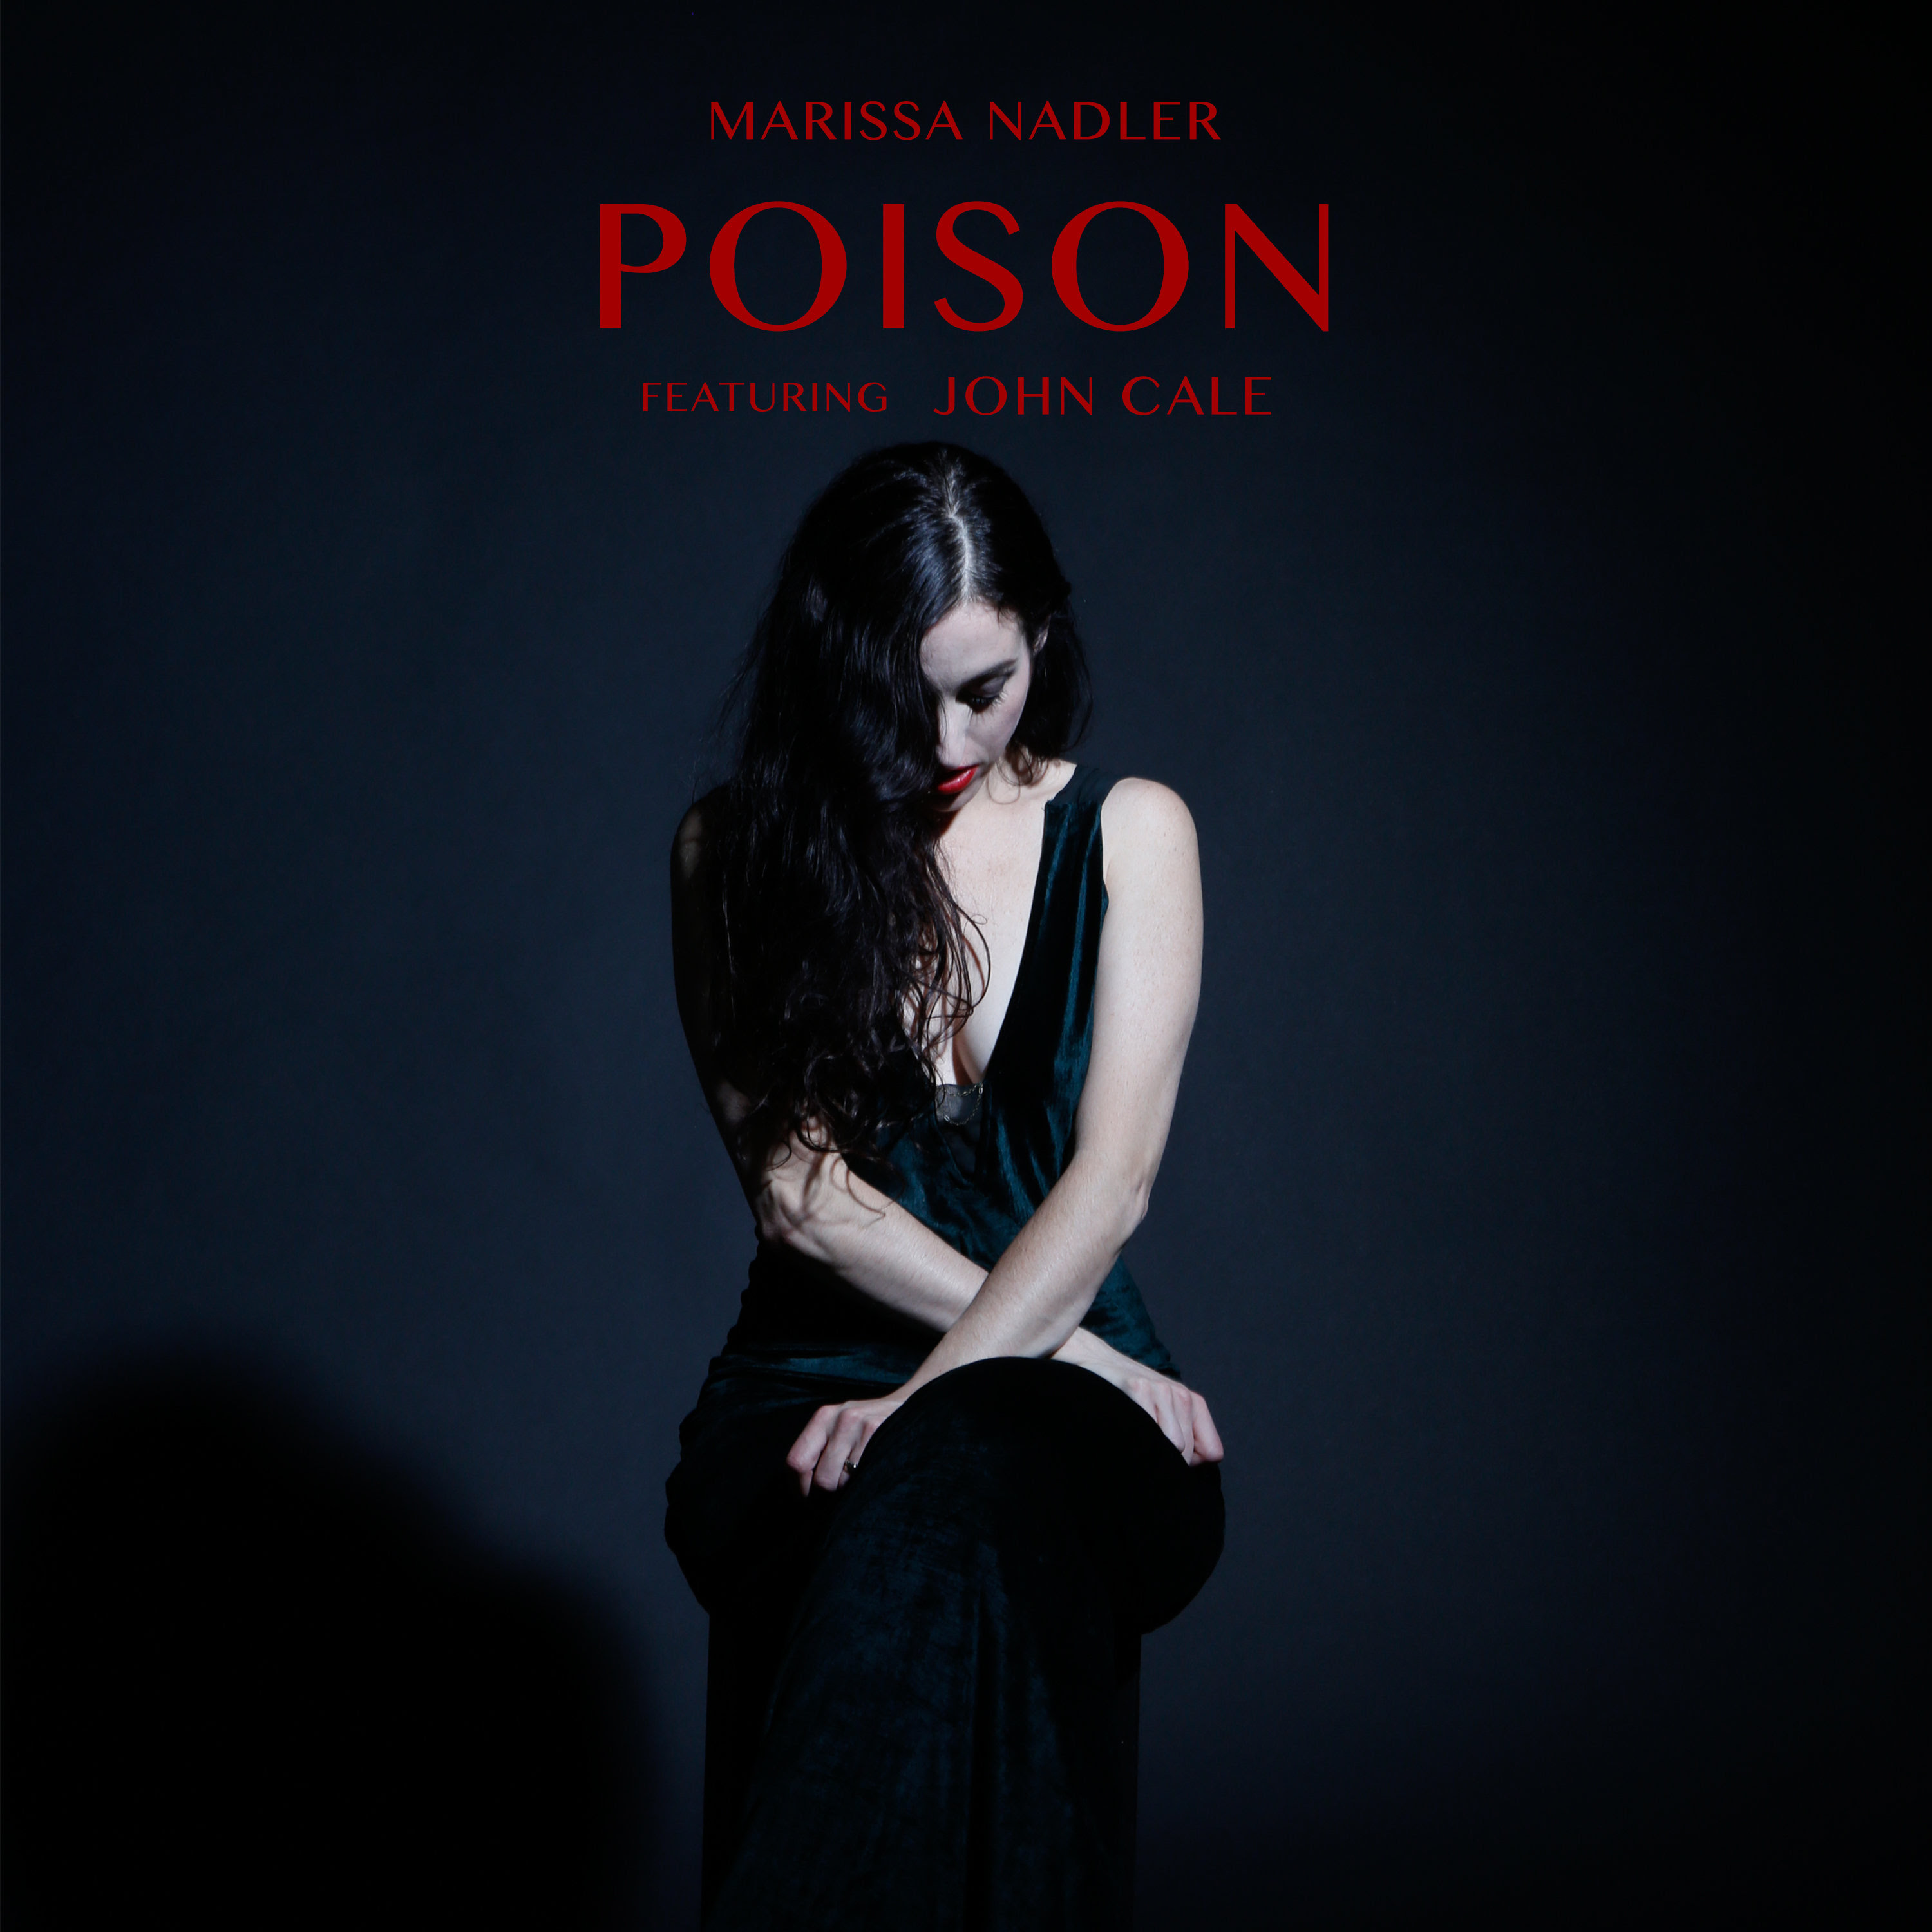 "Poison" by Marissa Nadler featuring John Cale, is Northern Transmissions' 'Song of the Day'